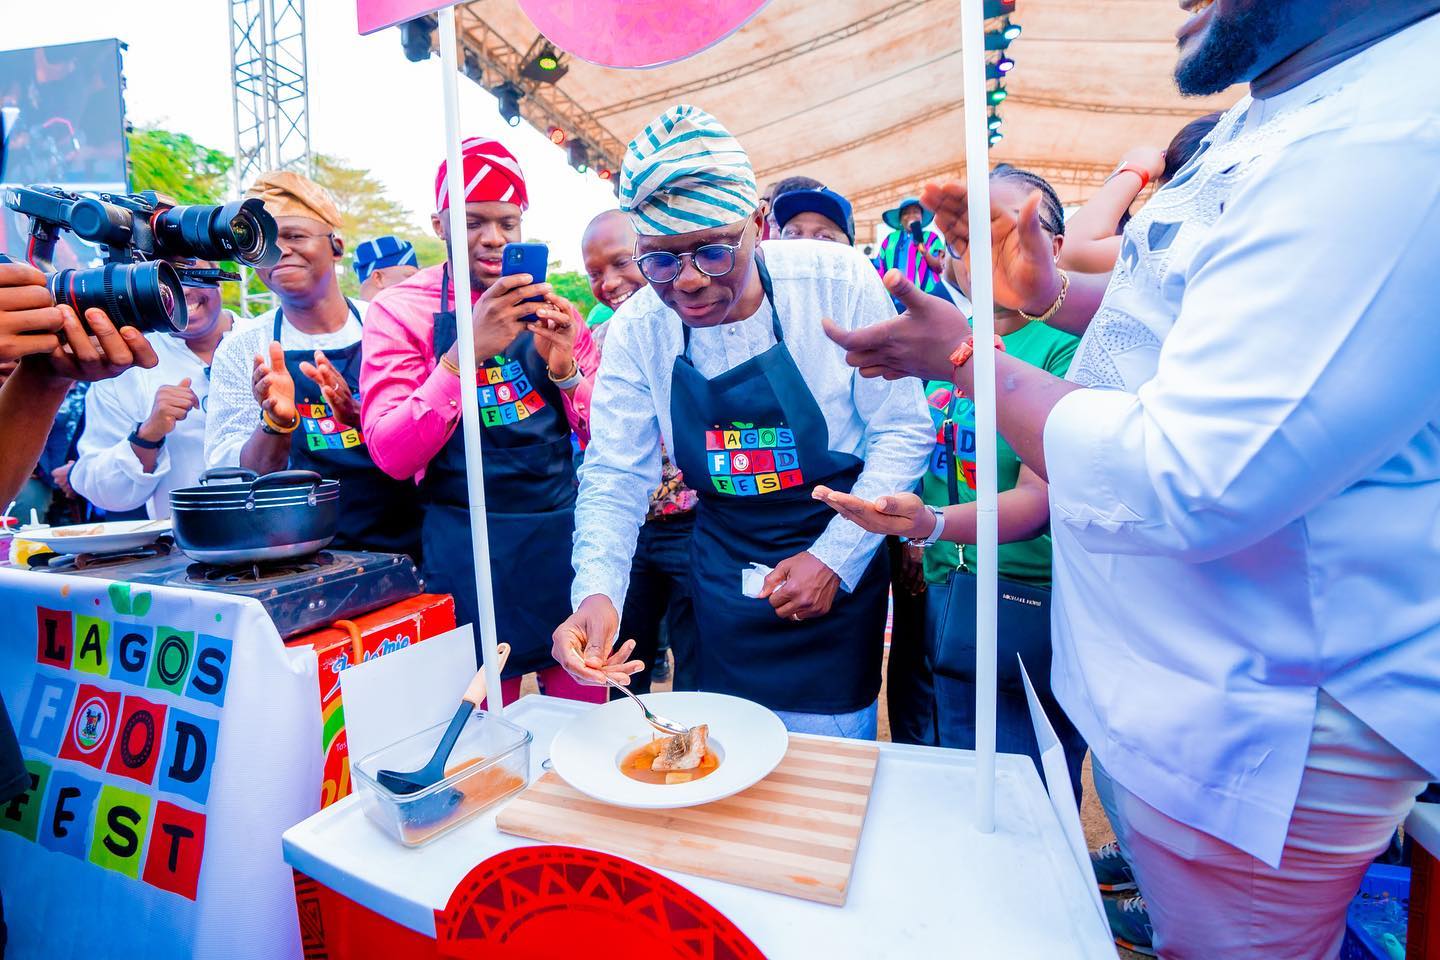 Gov. Babajide Sanwo-Olu joins chefs in the 2022 Lagos food festival to prepare fish pepper soup to the delight of participants at the event.